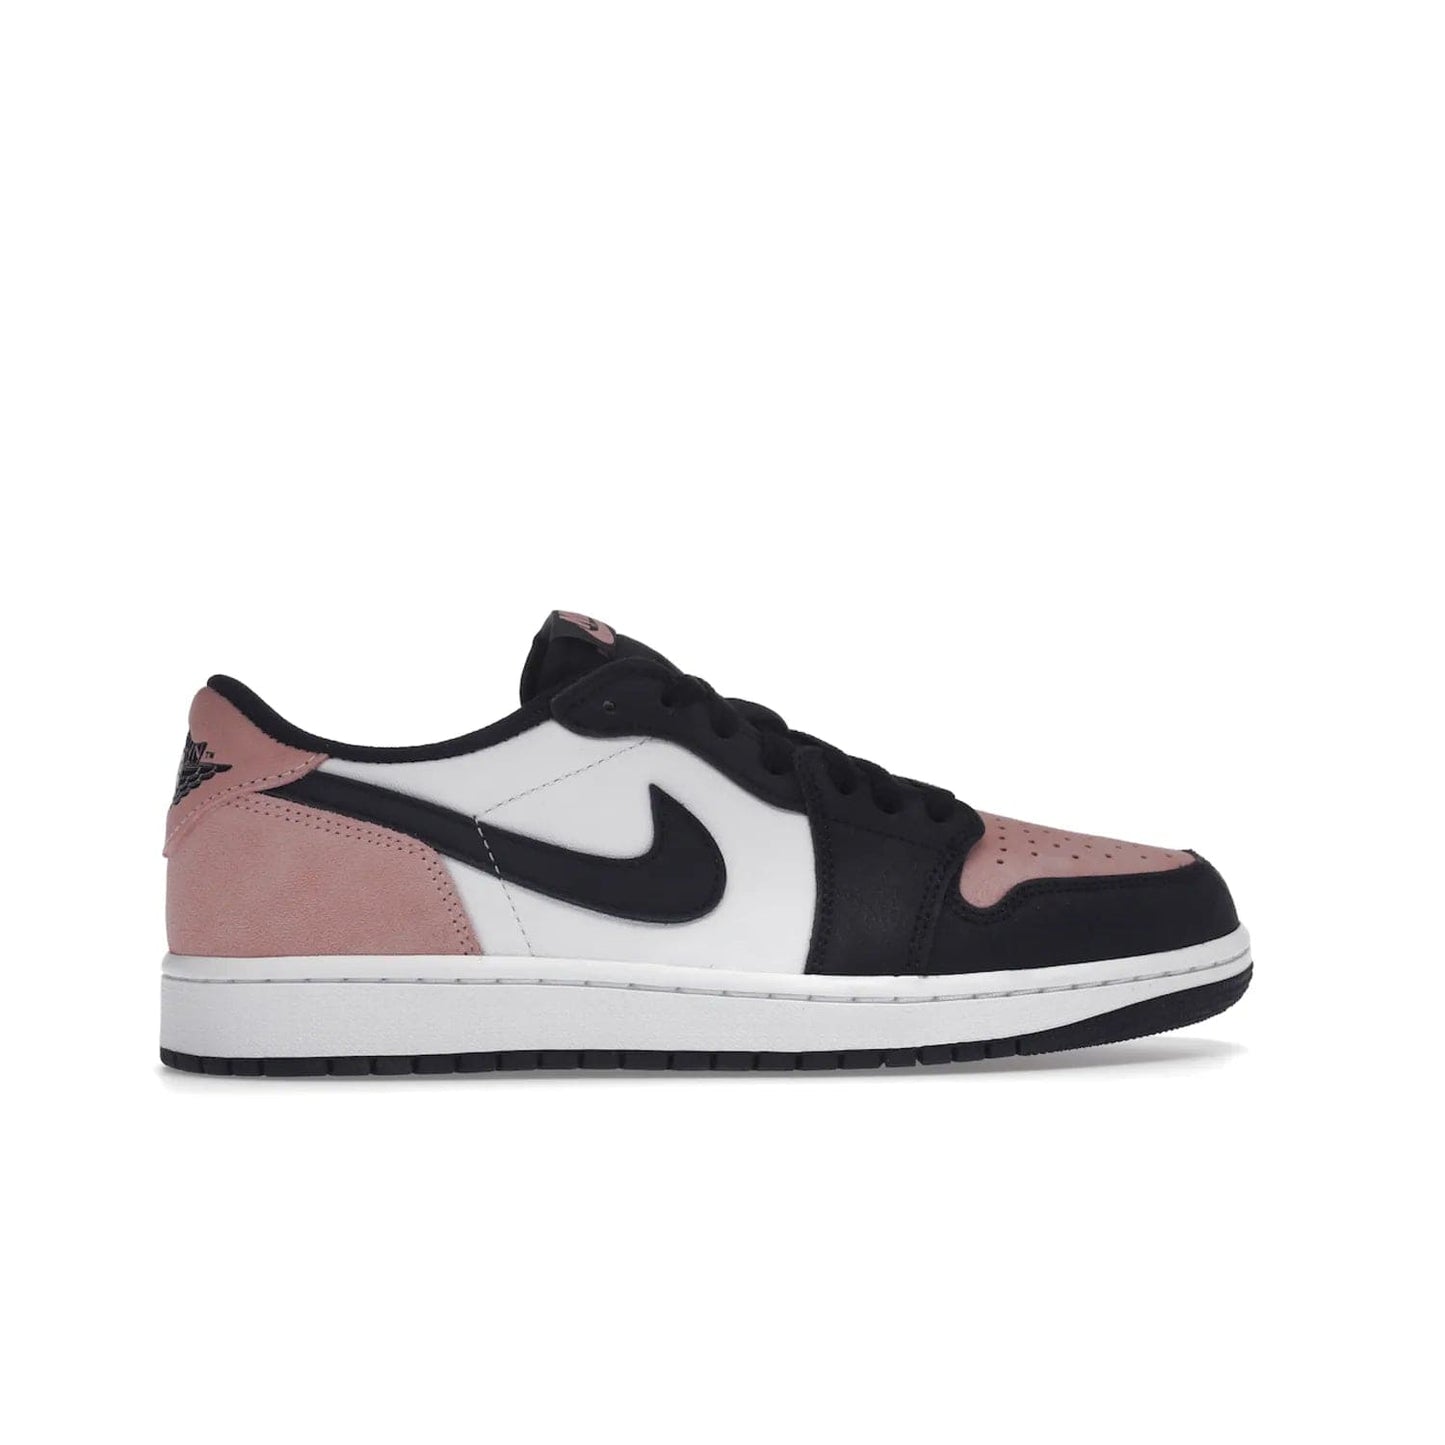 Jordan 1 Low OG Bleached Coral - Image 36 - Only at www.BallersClubKickz.com - Introducing the Air Jordan 1 Low OG Bleached Coral. Constructed with white leather, black cracked leather & Bleached Coral suede. Signature Jordan Wings logo, white Air sole. Get the pack in July 2022 and stand out.